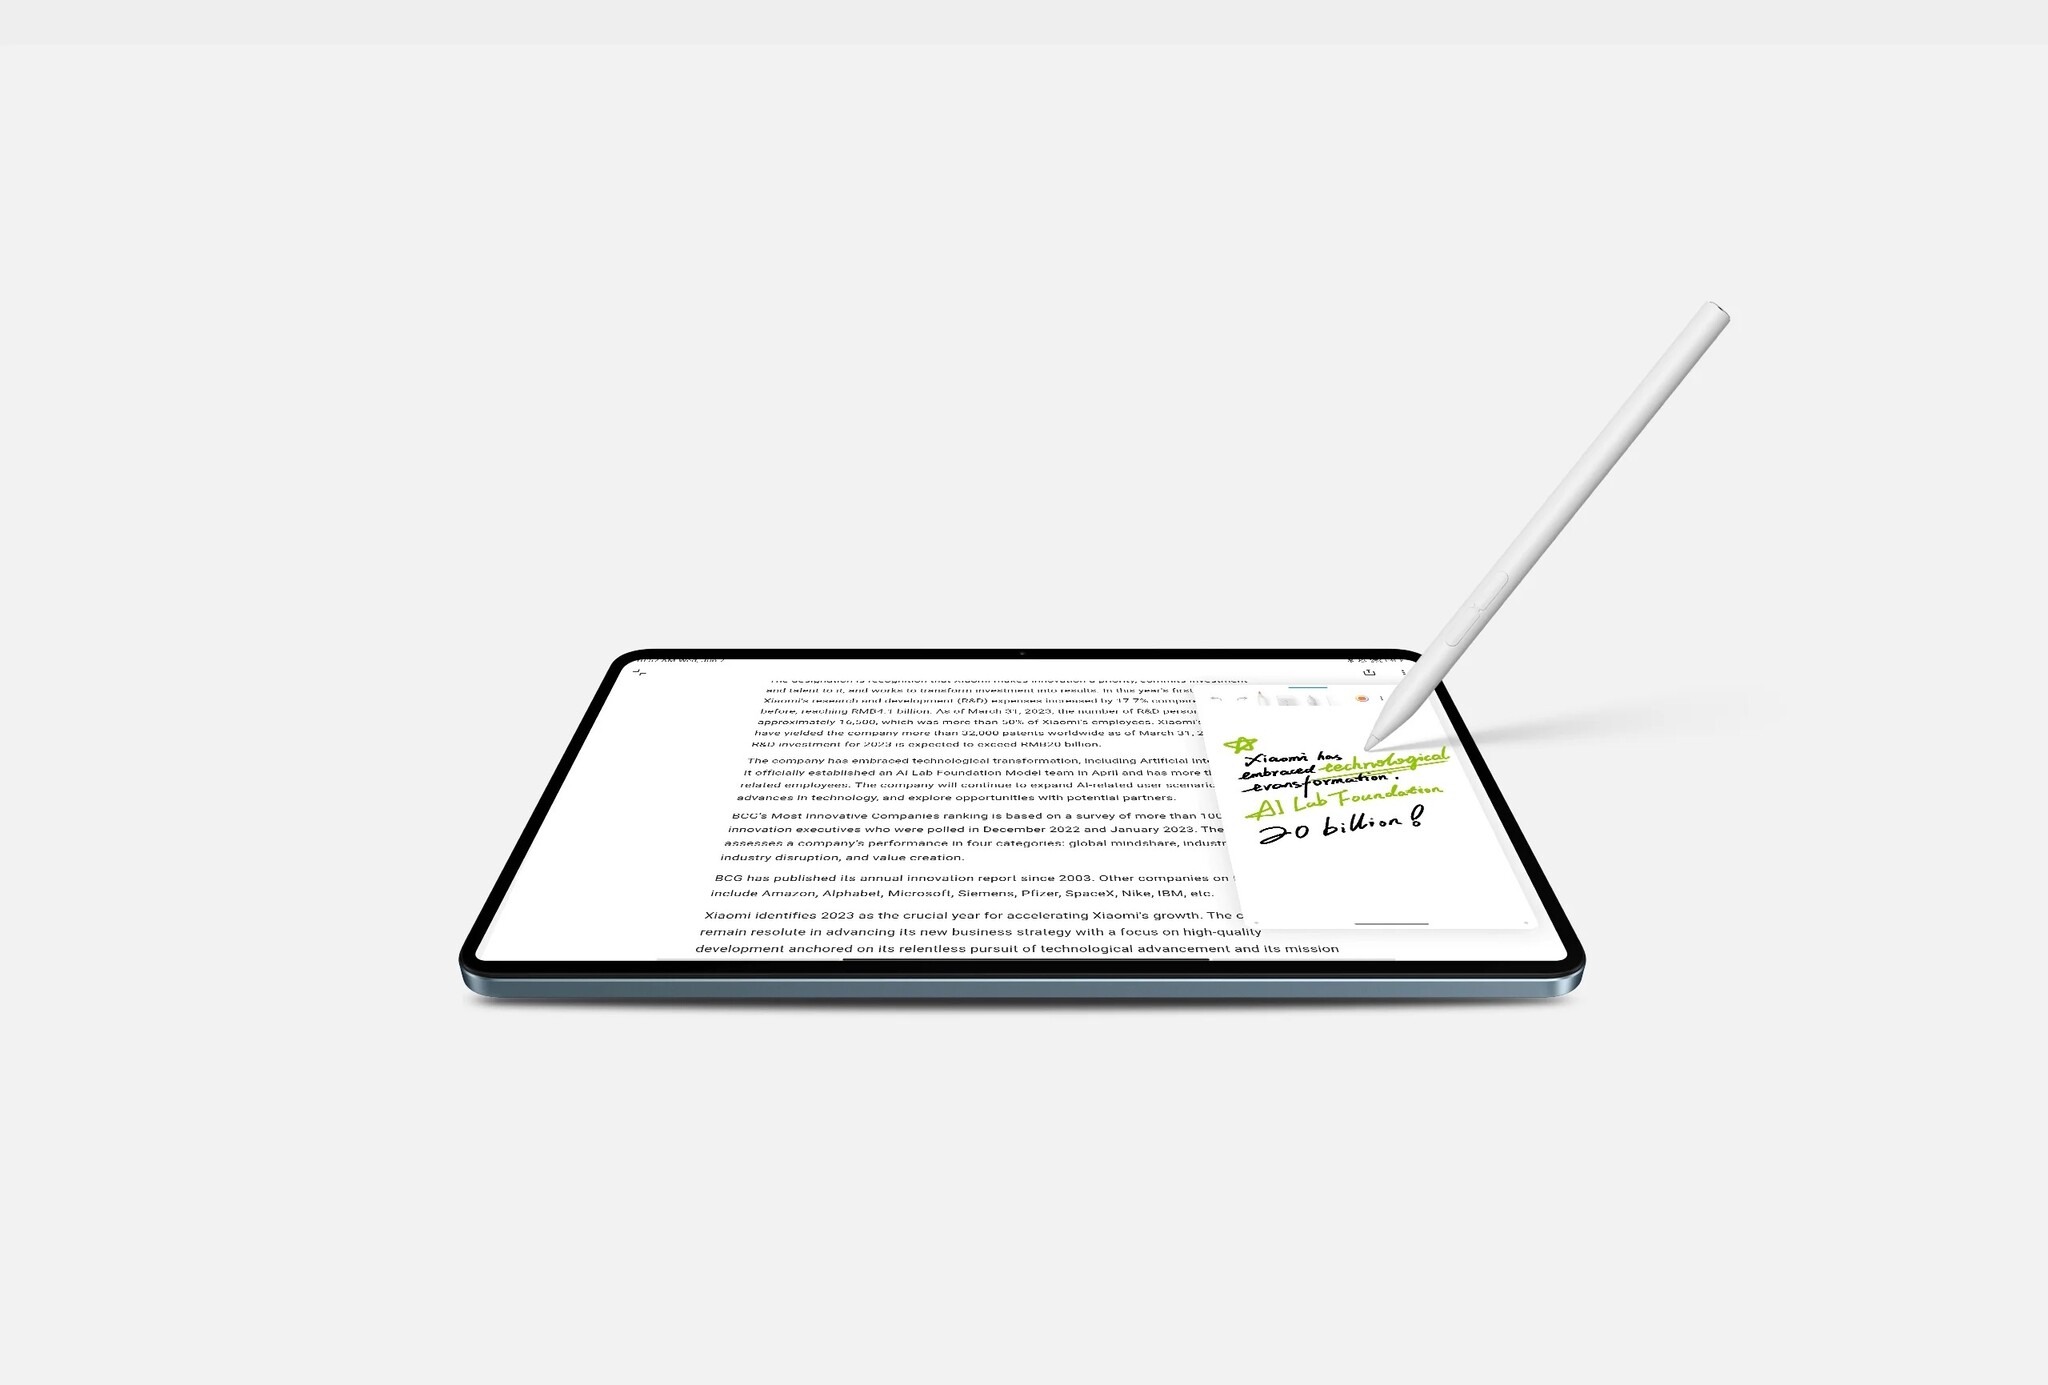 The latest Xiaomi Smart Pen 2nd Gen is now compatible with Xiaomi Pad 5 -  The Tech Outlook